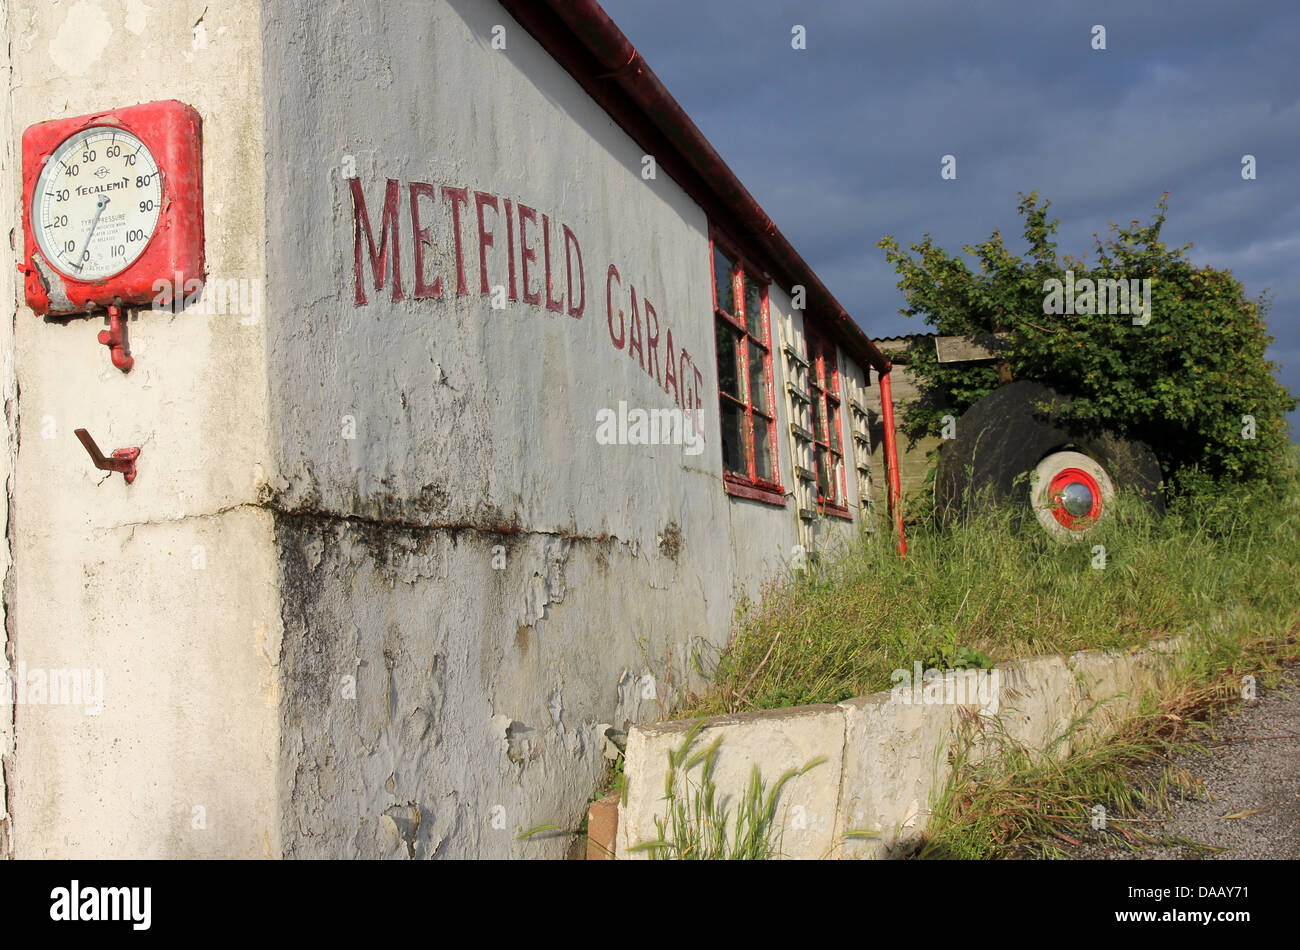 Metfield garage in Suffolk England, a disused rural petrol station and garage at the edge of a World War Two airfield. Stock Photo